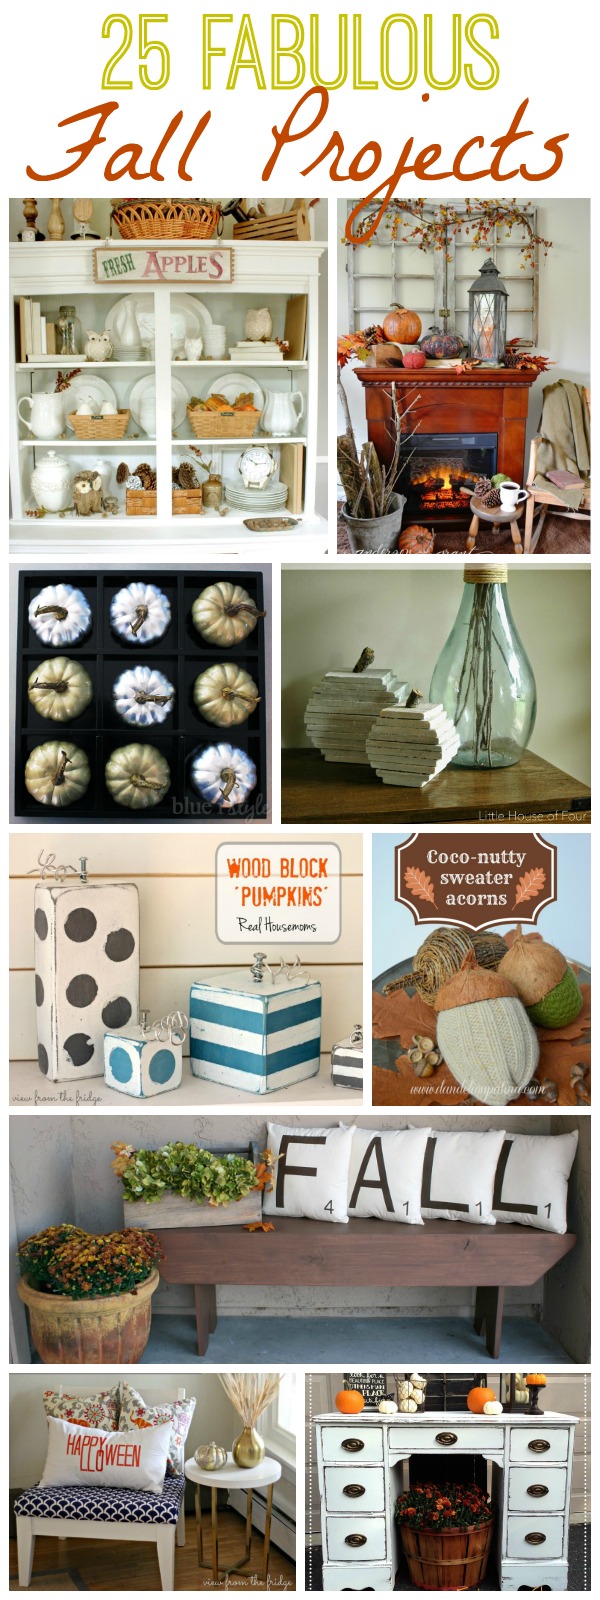 25 Fabulous Fall Projects at The Happy Housie